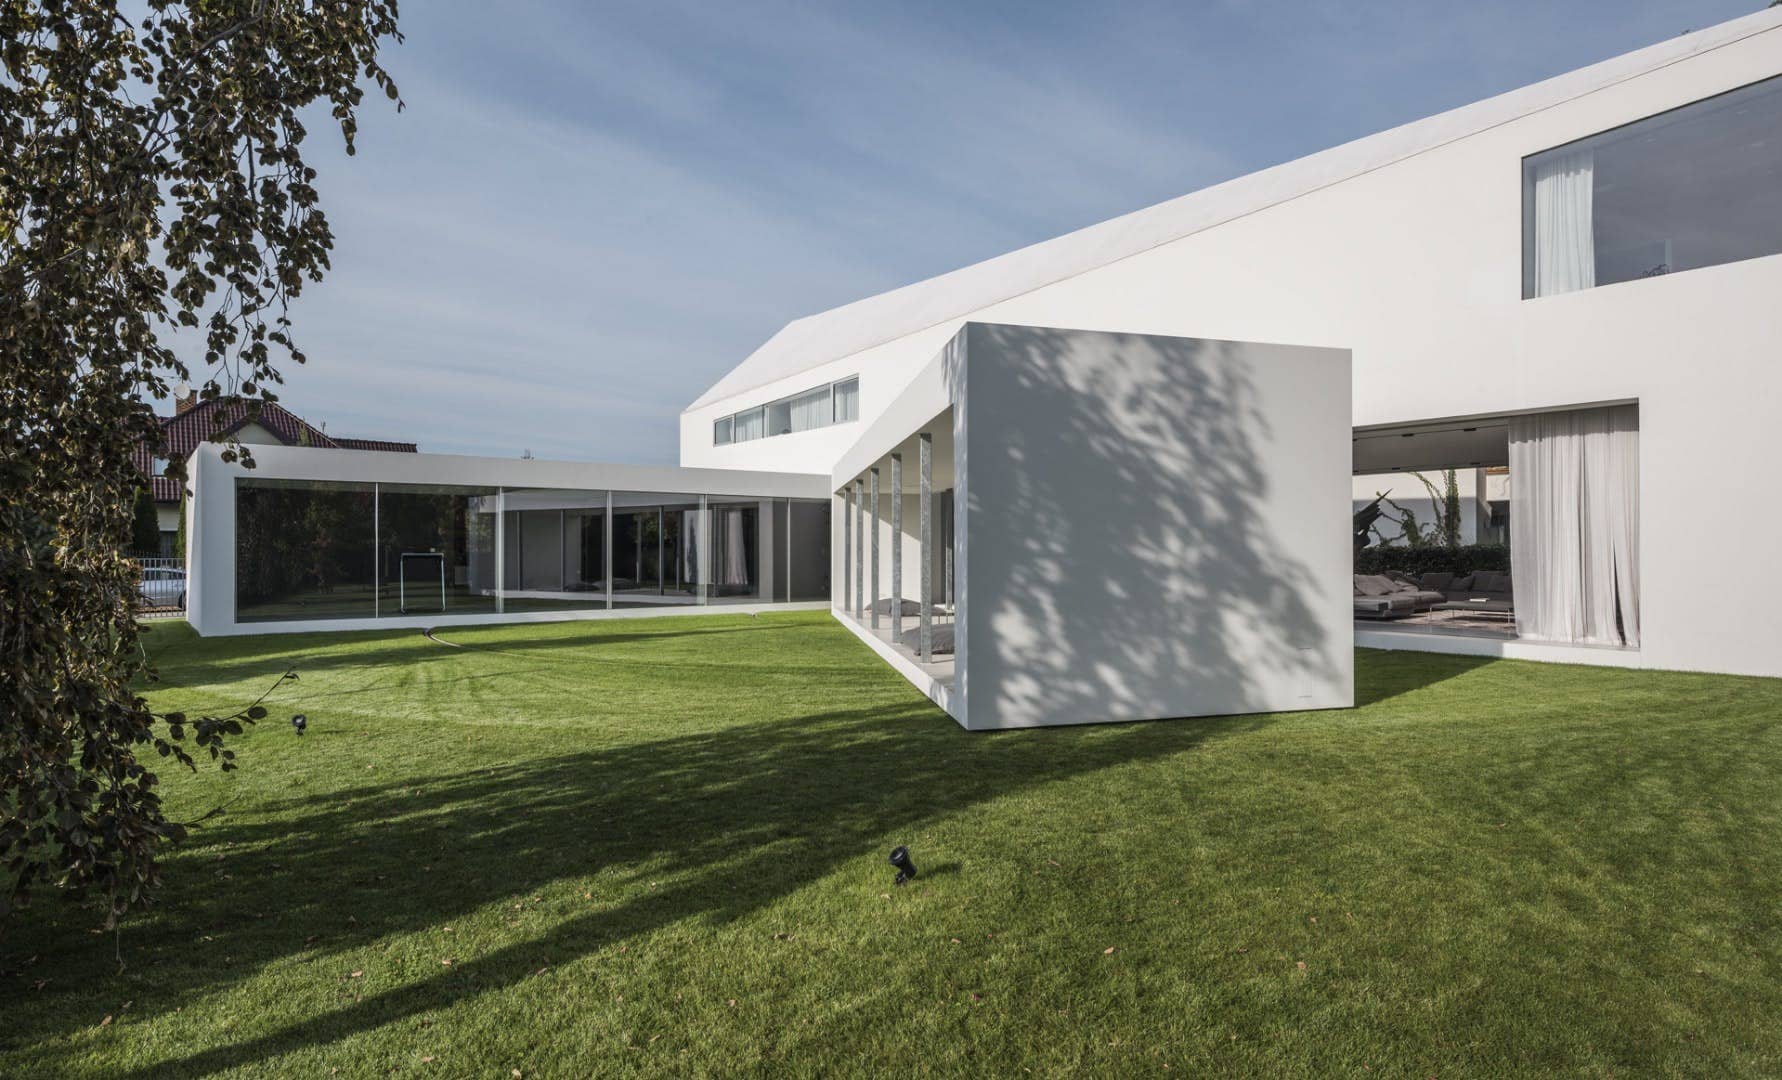 The Quadrant Home By KWK Promes Moves According To Sun